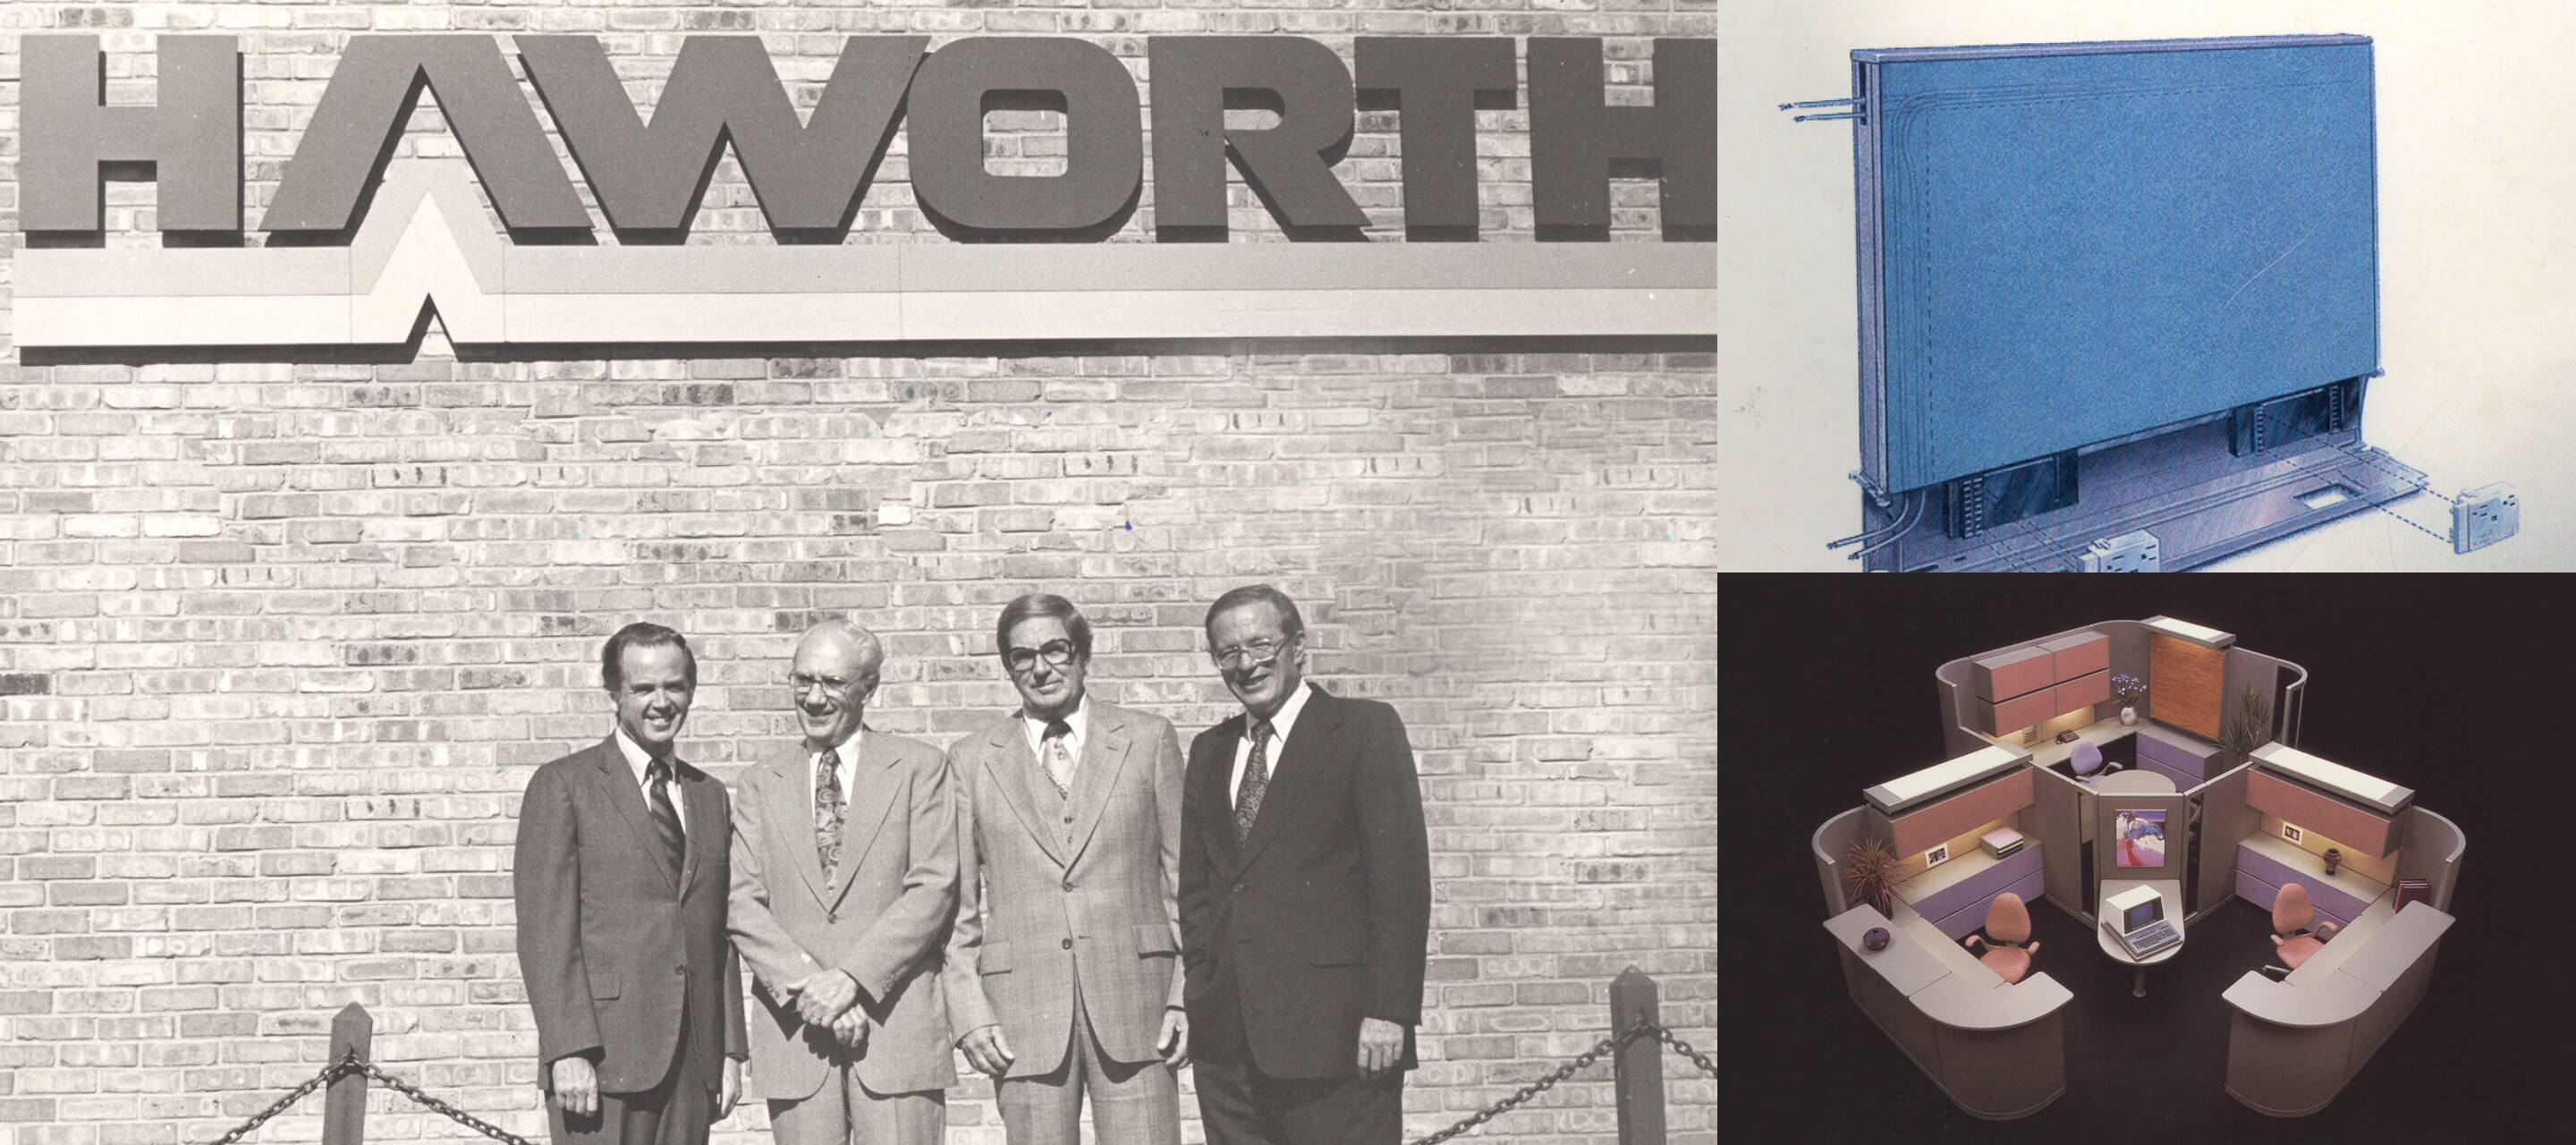 1970s​—In 1976, Modern Partitions changes its name to Haworth, Inc. That same year, Dick Haworth helps devise a way to prewire panels, and patents the most innovative workplace product since open-plan ofﬁce systems.​ Haworth International, Inc., is formed to set up foreign licenses for the manufacture and marketing of ofﬁce interior systems. 